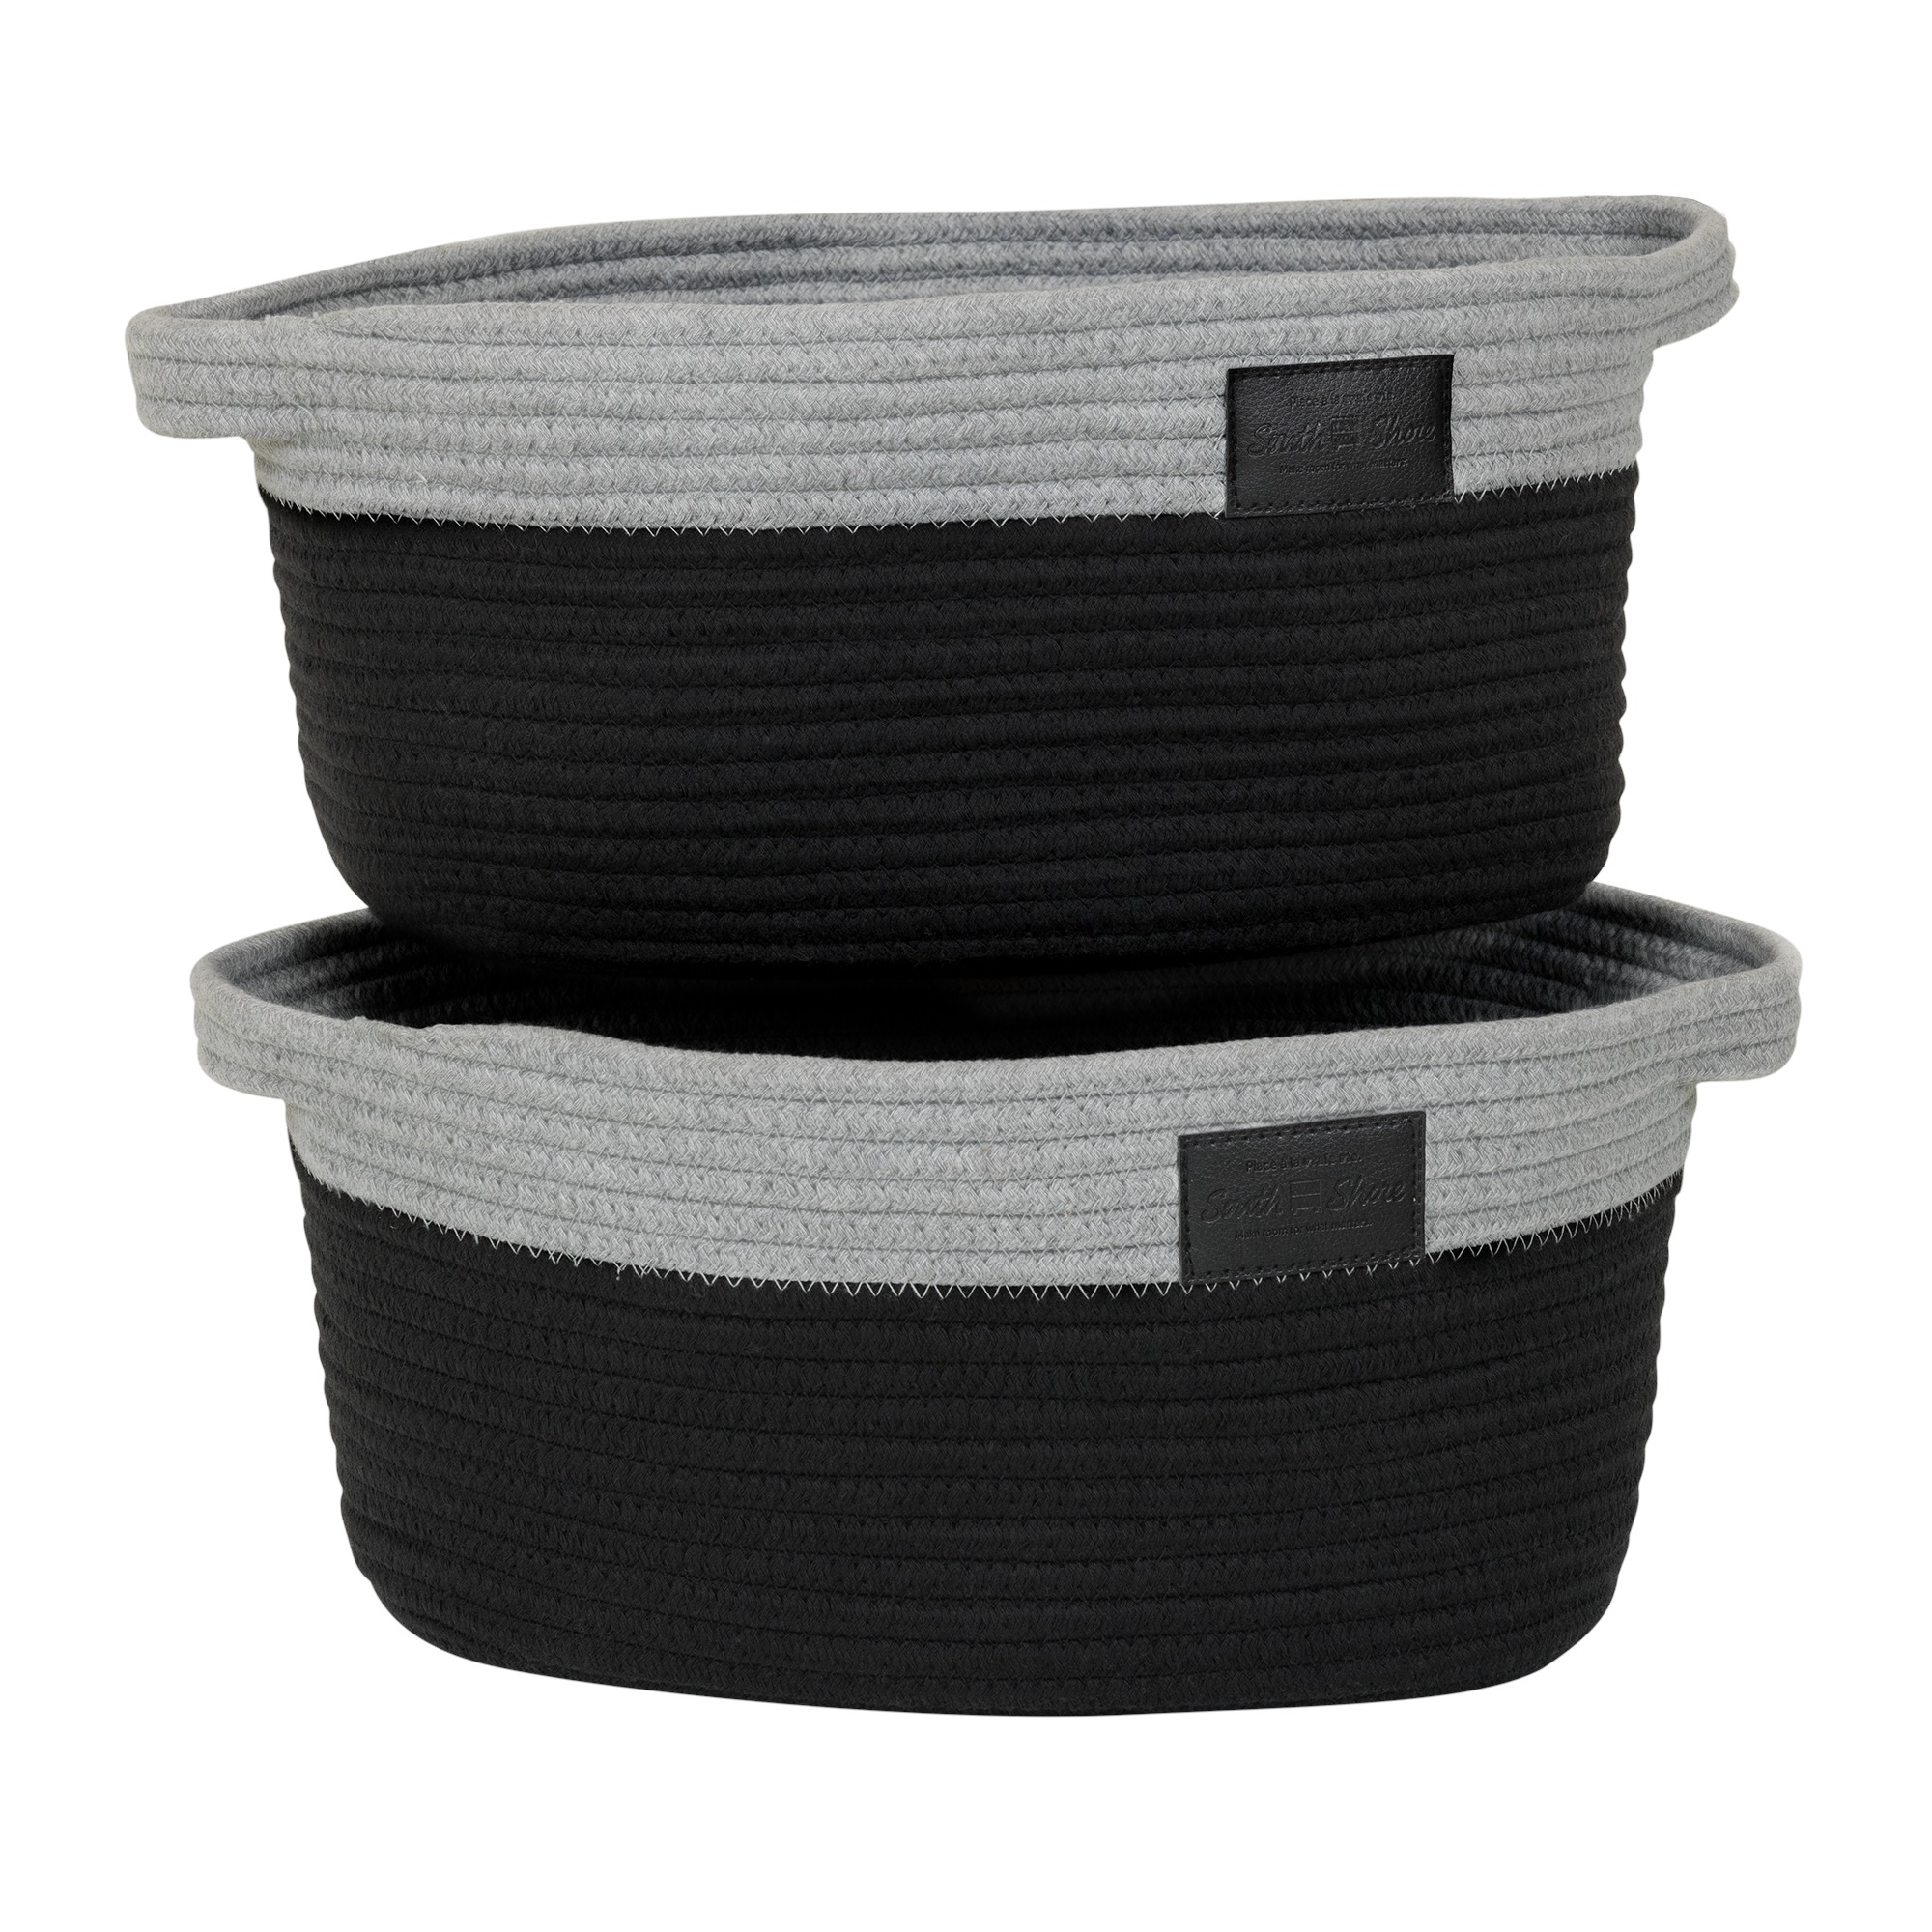 South Shore Storit Gray and Black Knit Baskets, 2-Pack